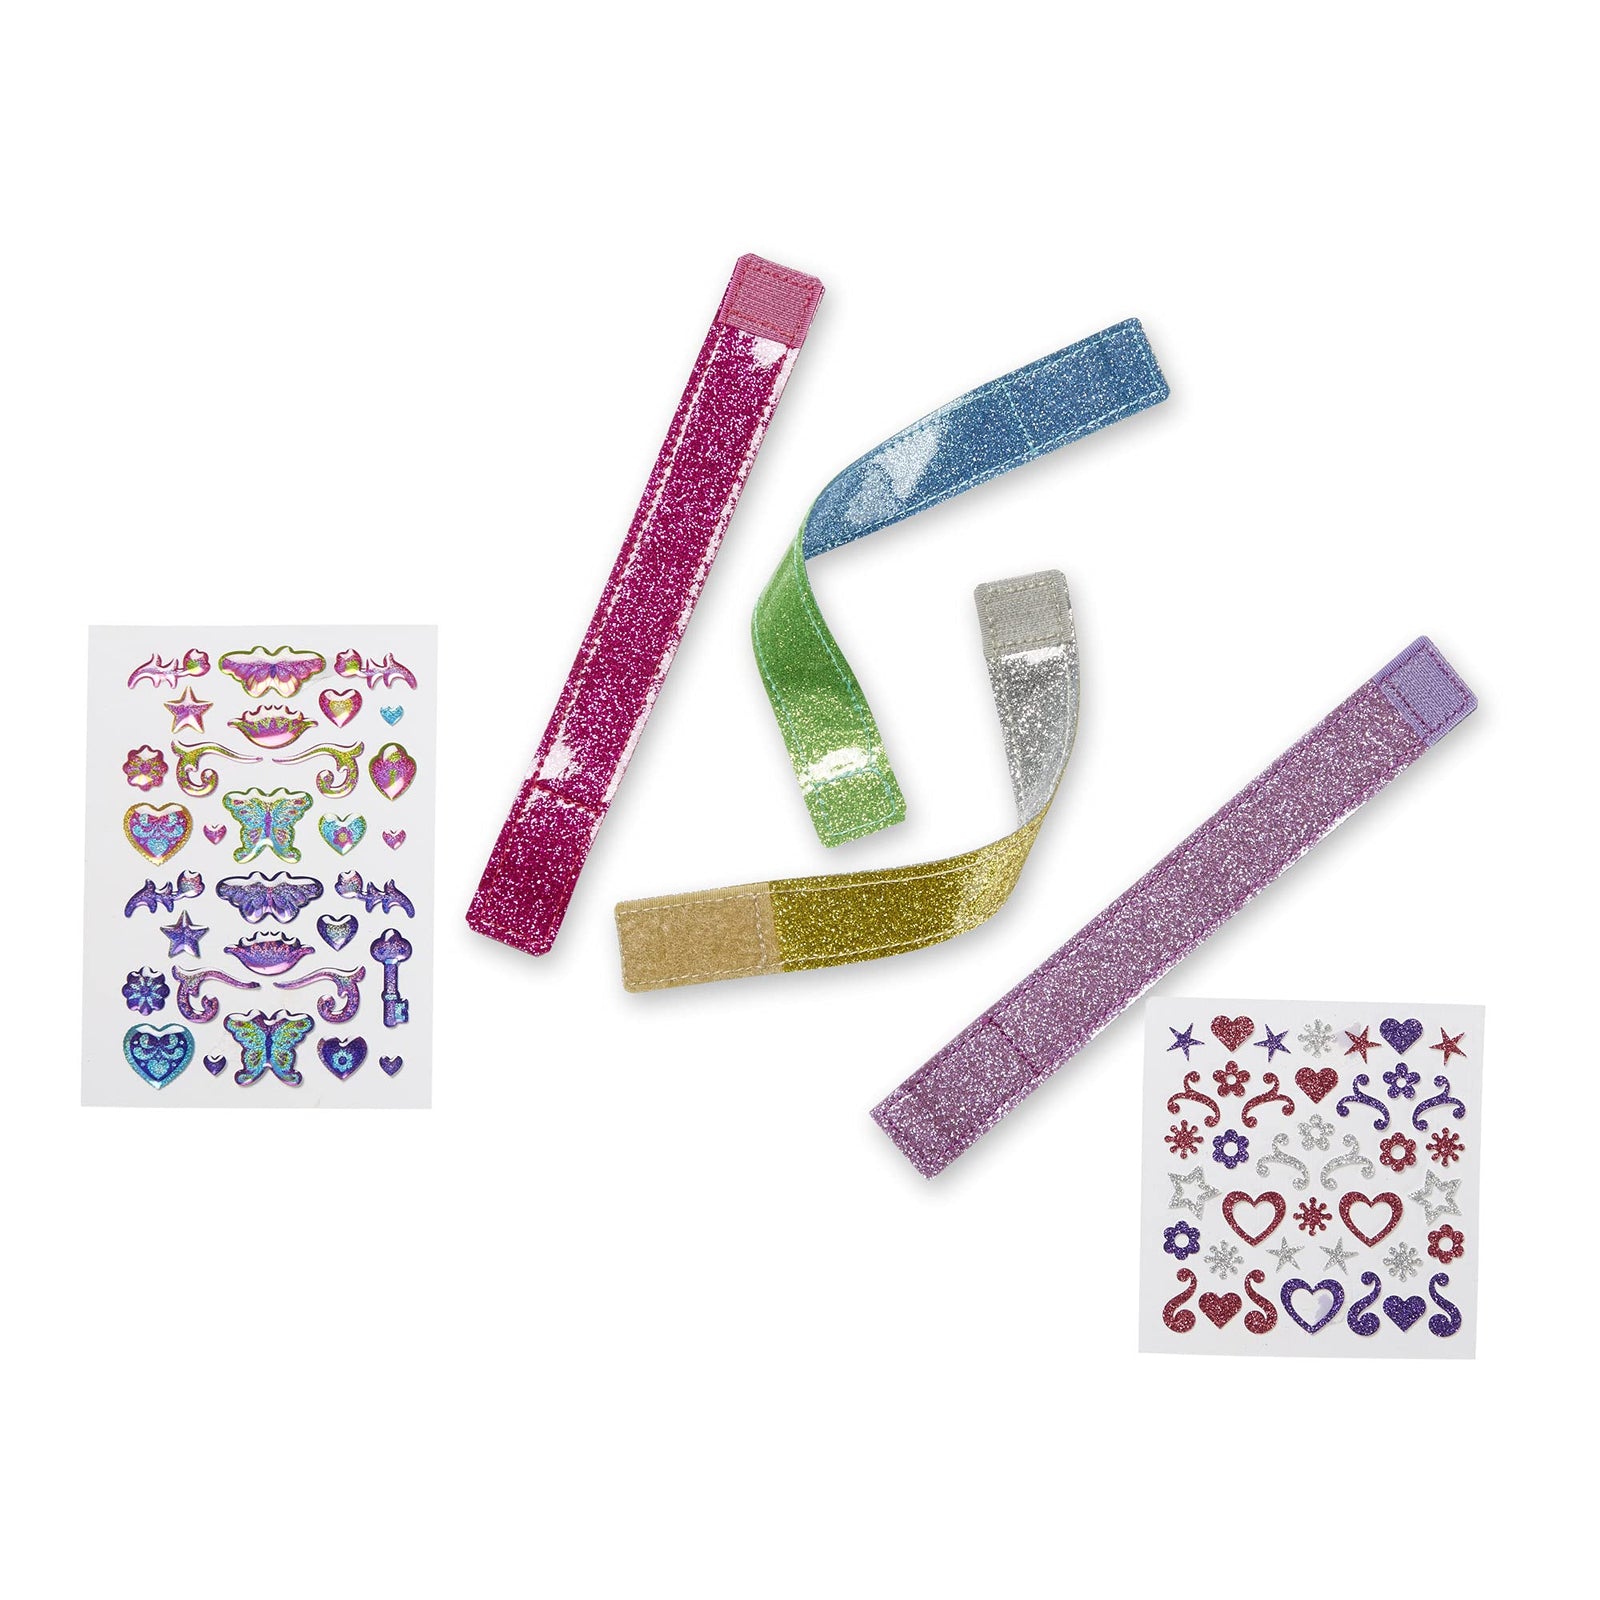 Melissa & Doug Design-Your-Own Bracelets With 100+ Sparkle Gem and Glitter Stickers